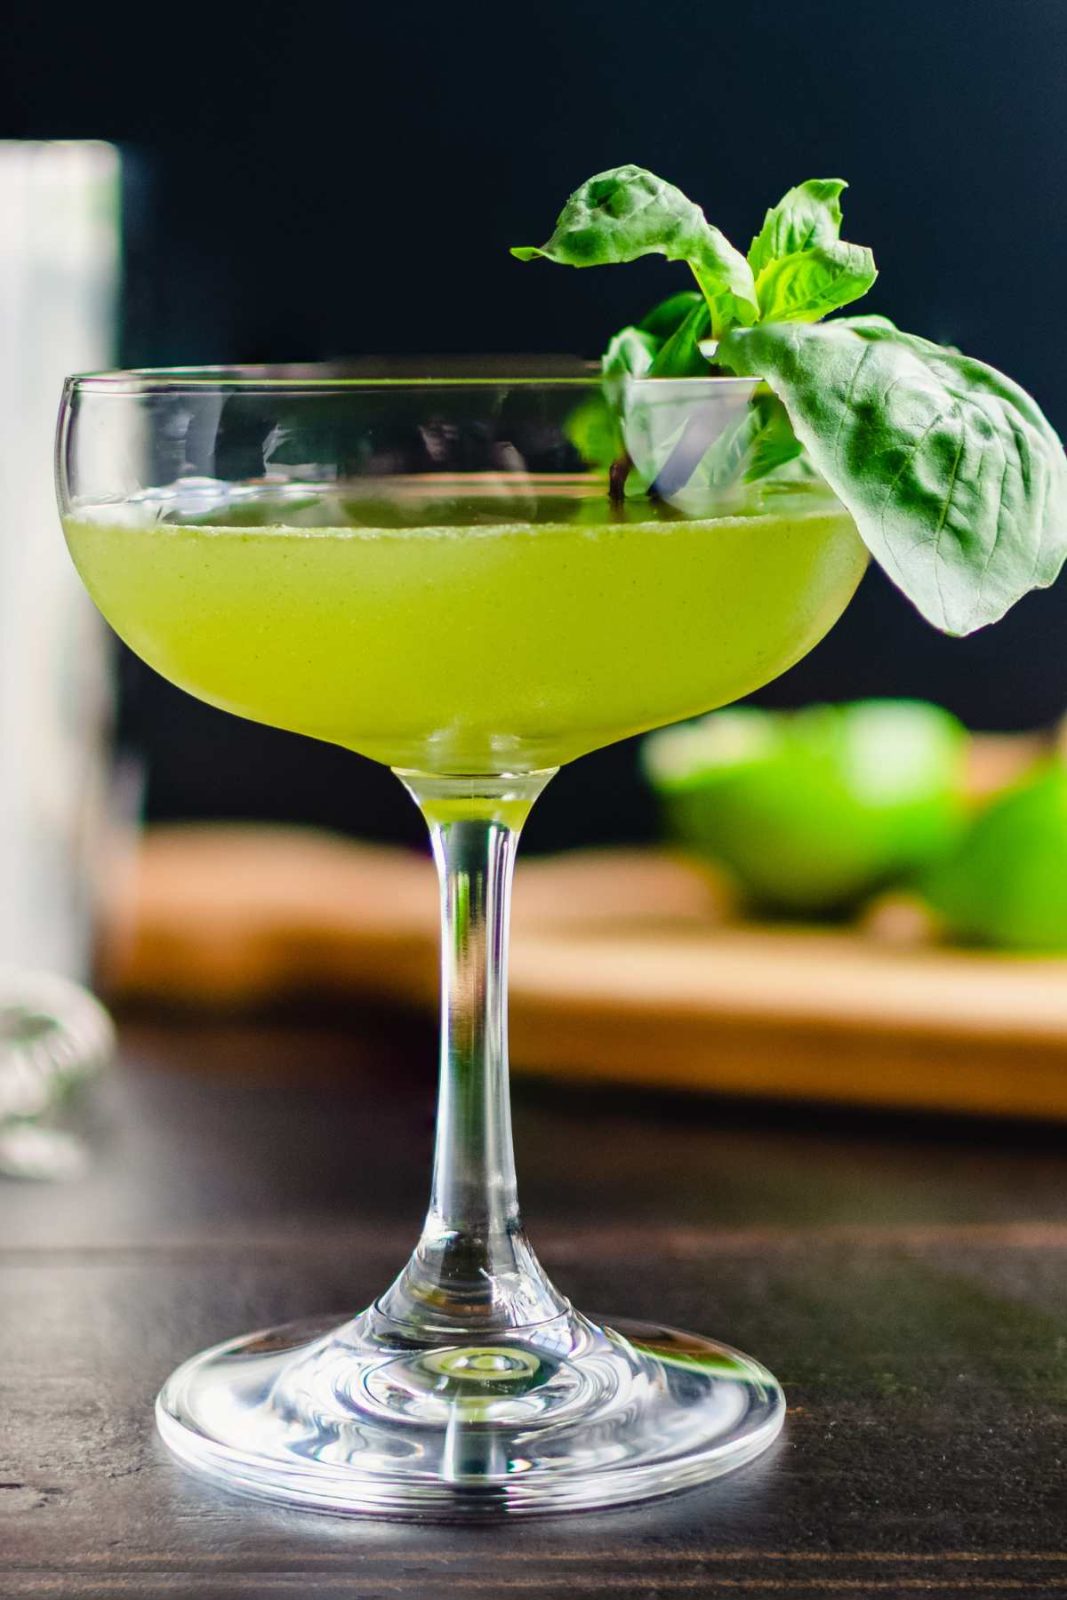 Known for its aromatic and slightly peppery flavor, basil infuses drinks with a fresh and herbaceous quality that tantalizes the taste buds. Whether you're hosting a big party or simply looking to impress your friends with your bartending skills, Basil Cocktails are sure to be a hit.